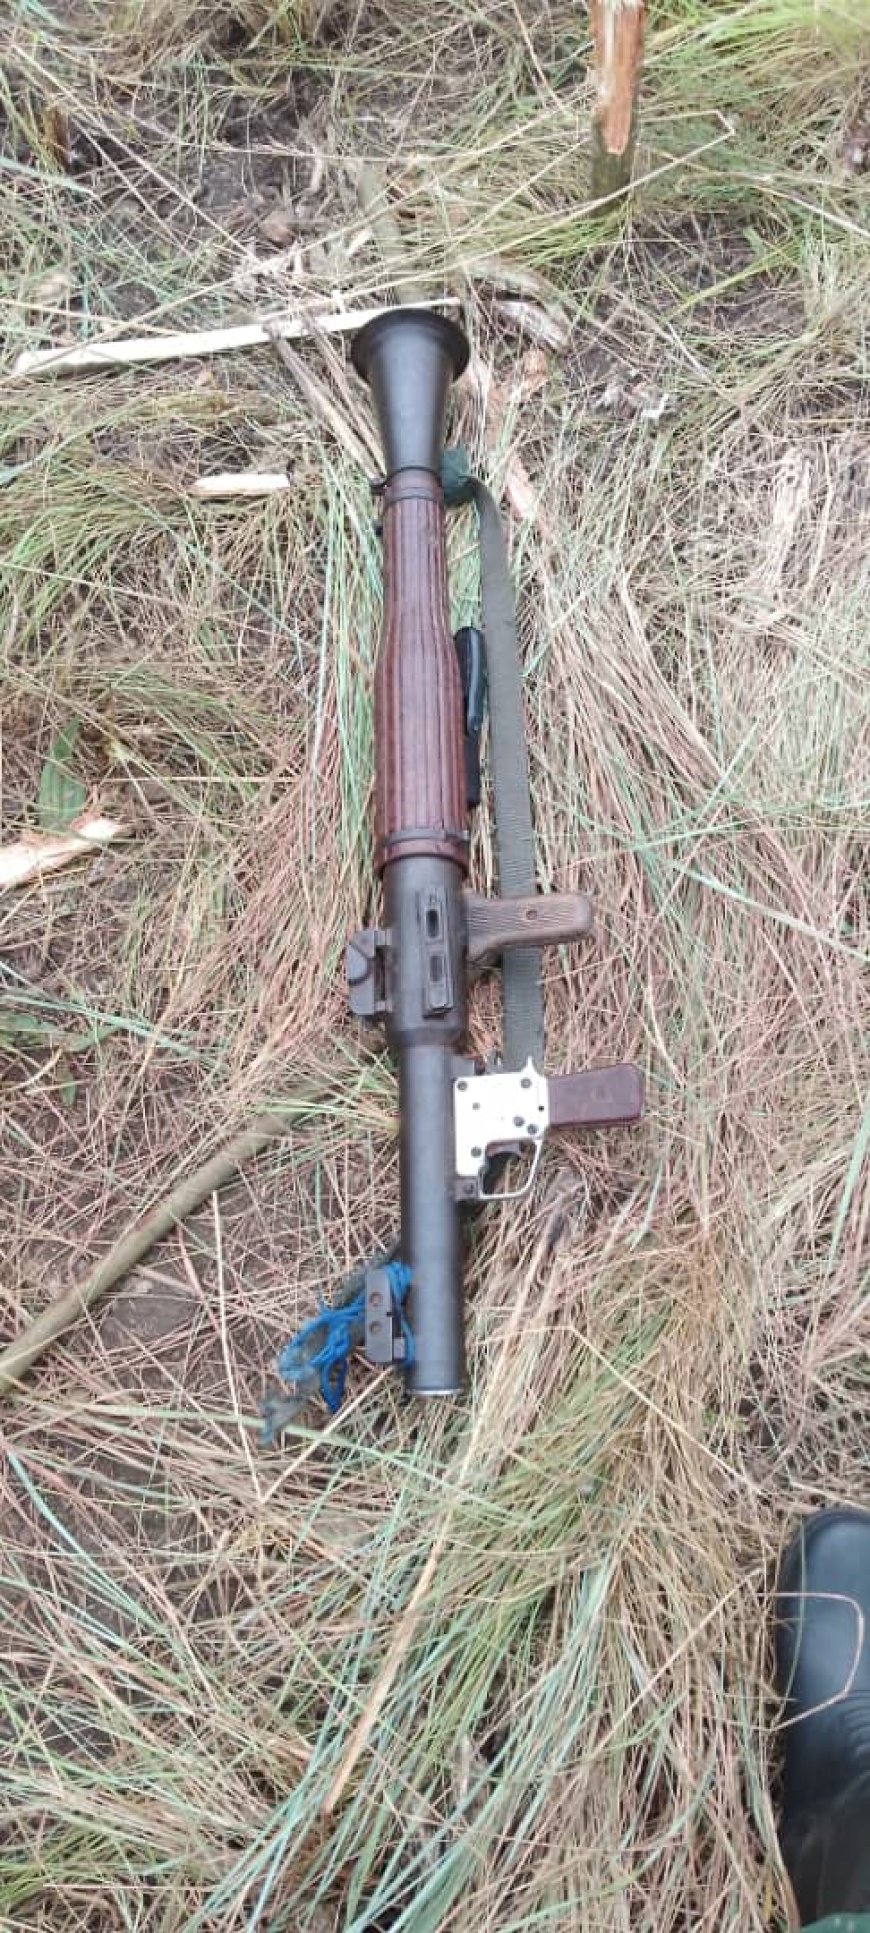 UPDF Kills Two Top ADF Rebels, Recovers RPG Launcher and Rescues Three Children